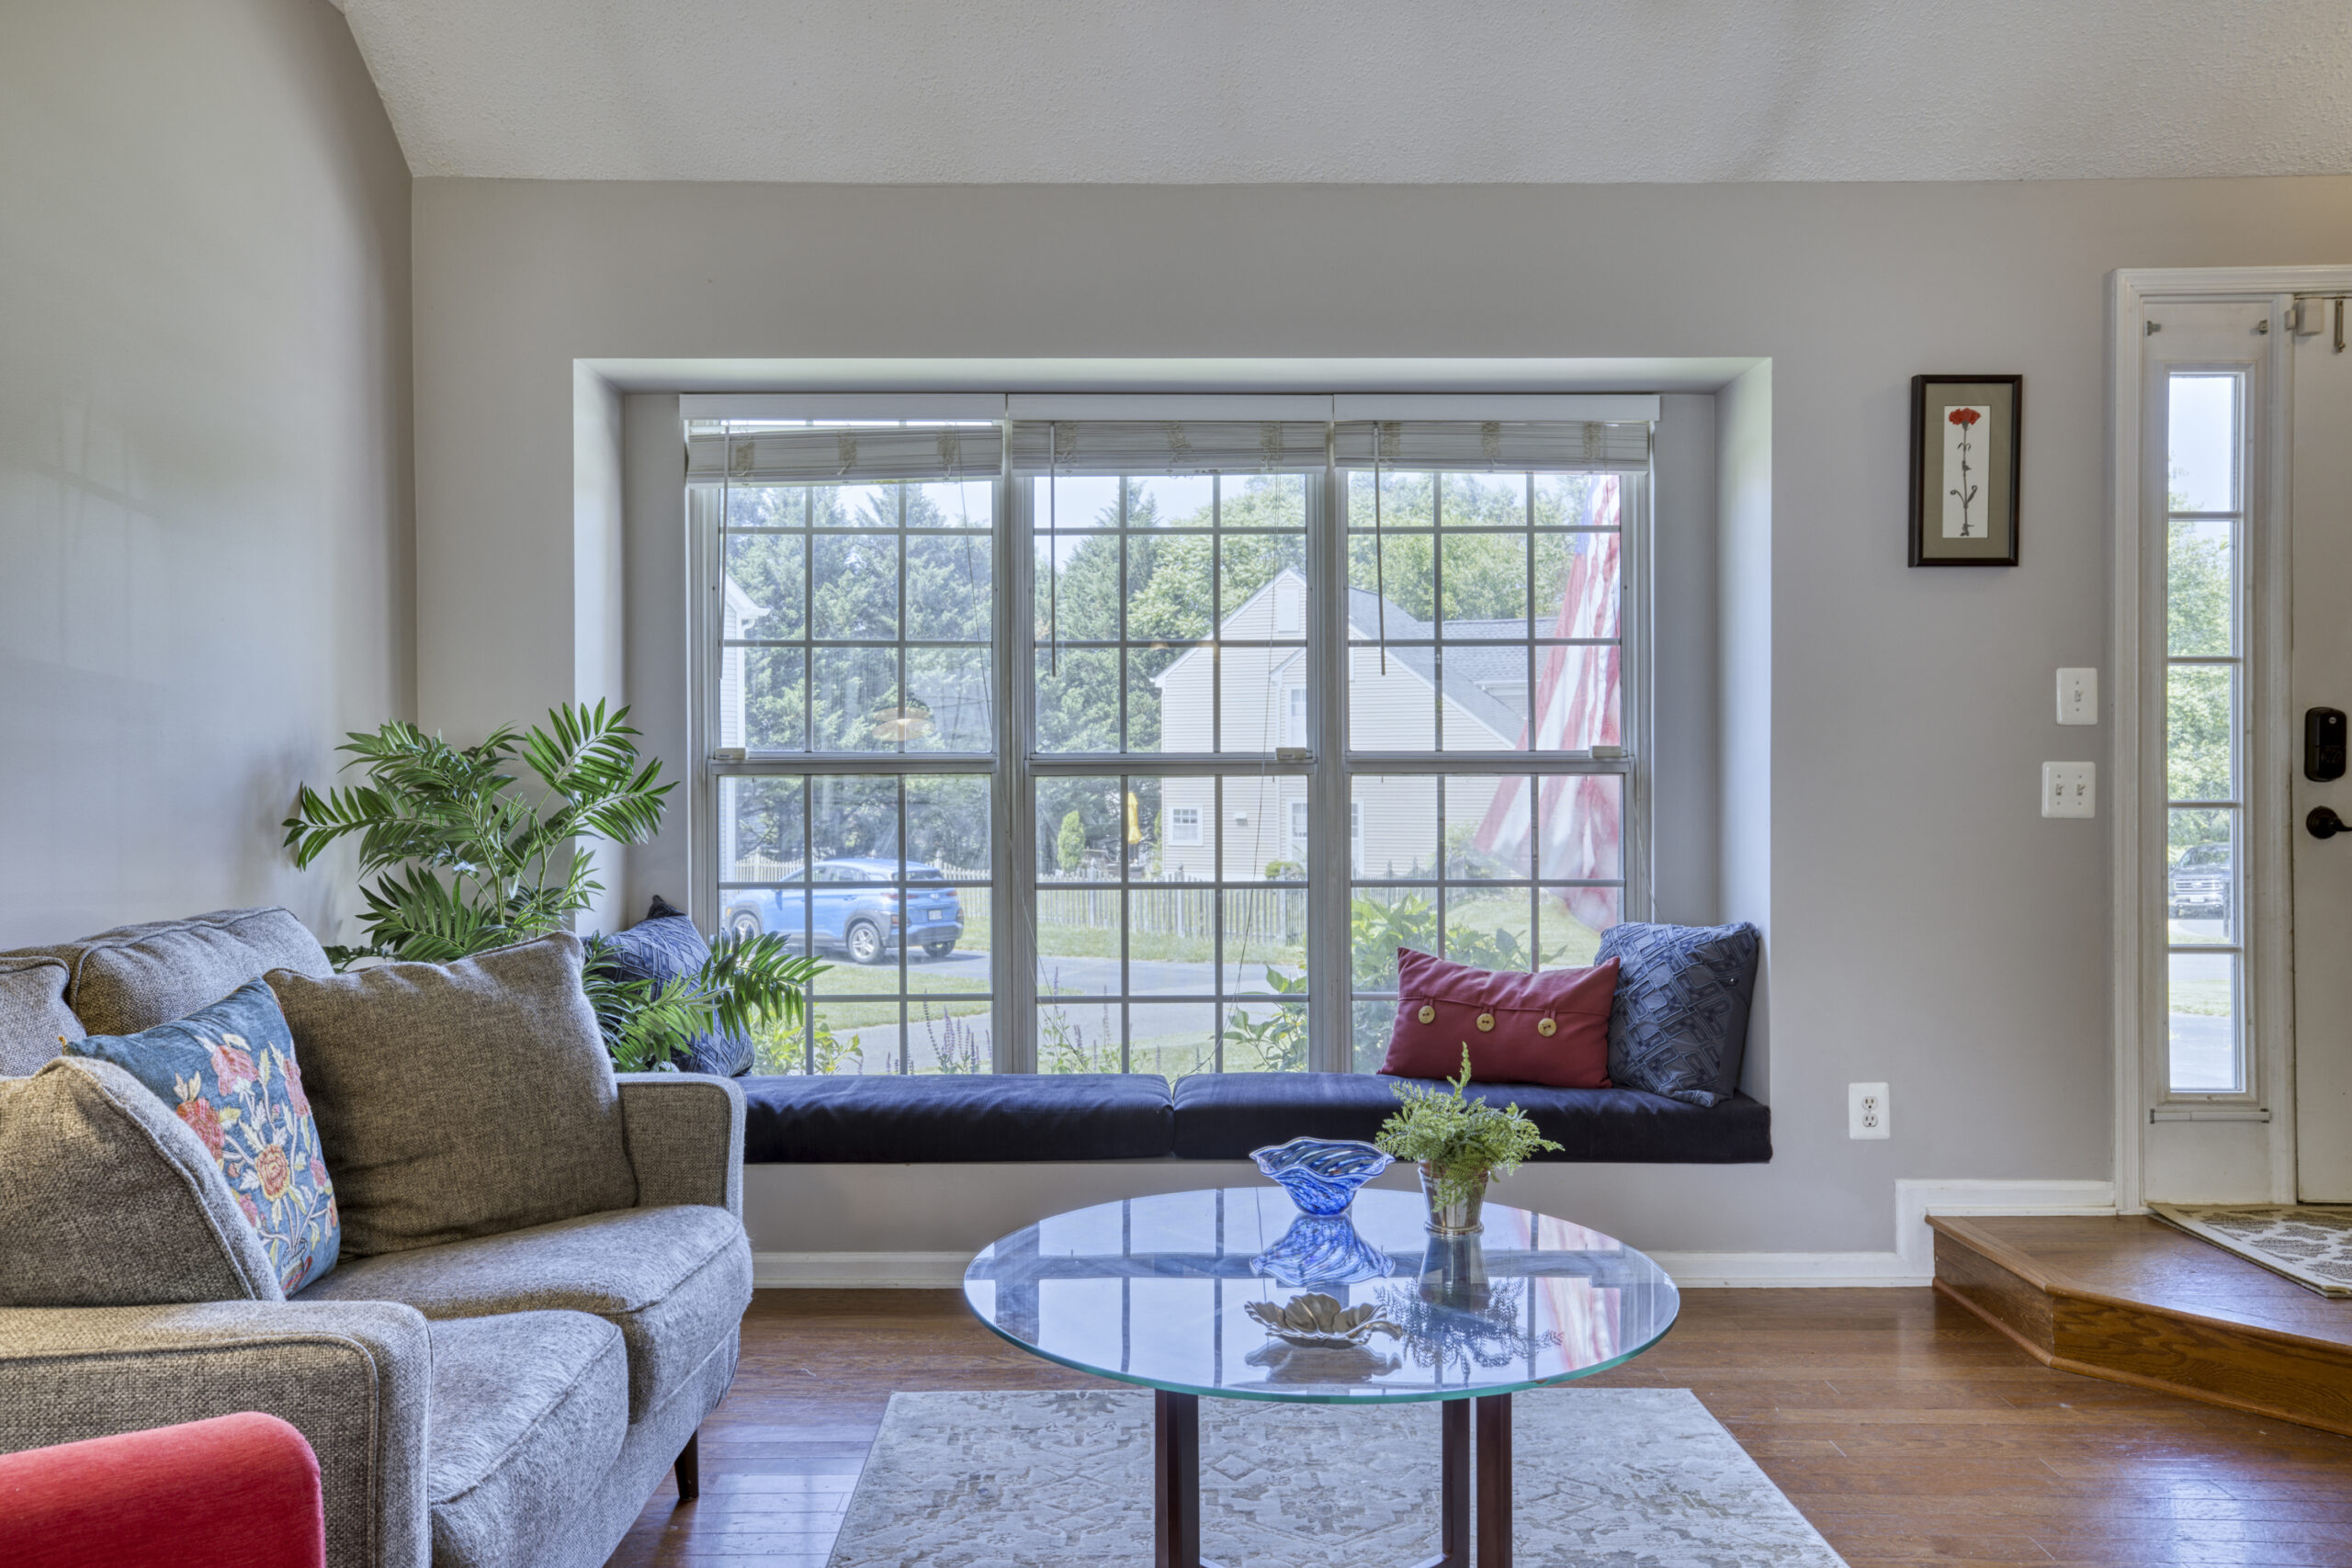 Professional interior photo of 12309 Stalwart Court - showing the front living room looking towards the front window where there is a window seat with blue cushions